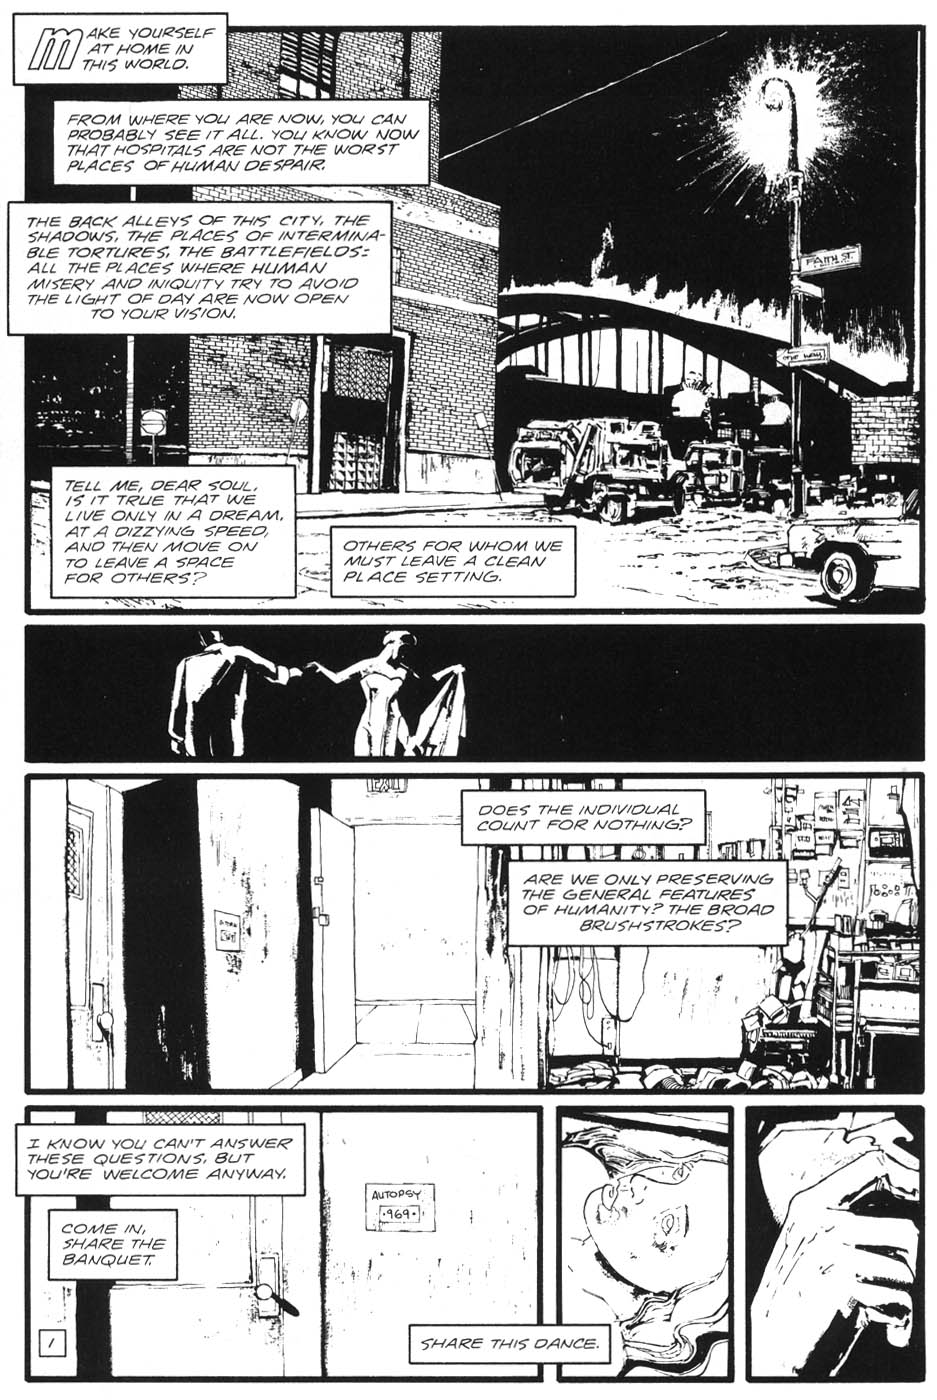 Read online Batman Black and White comic -  Issue #1 - 5